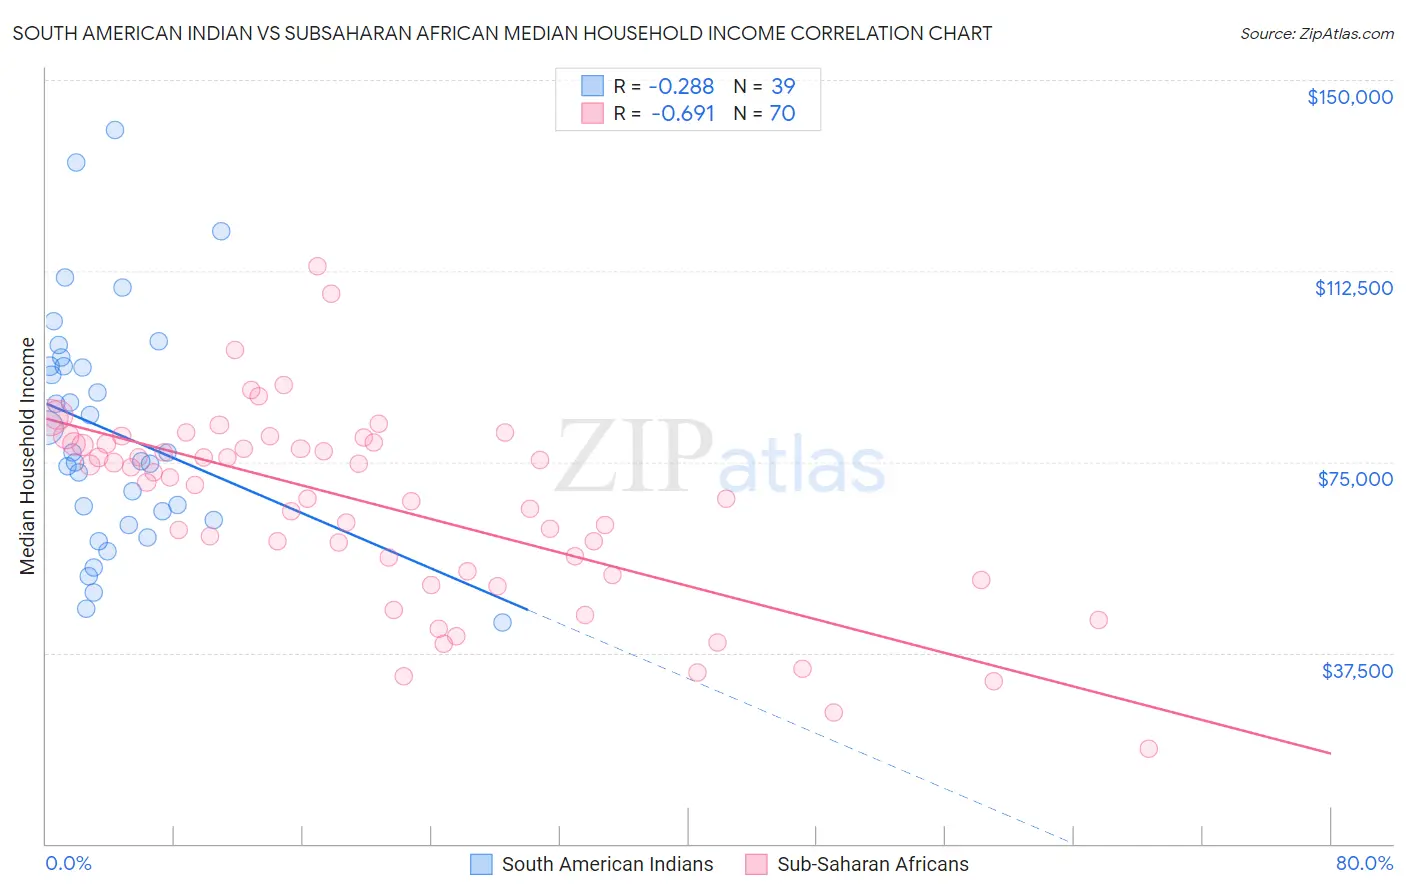 South American Indian vs Subsaharan African Median Household Income